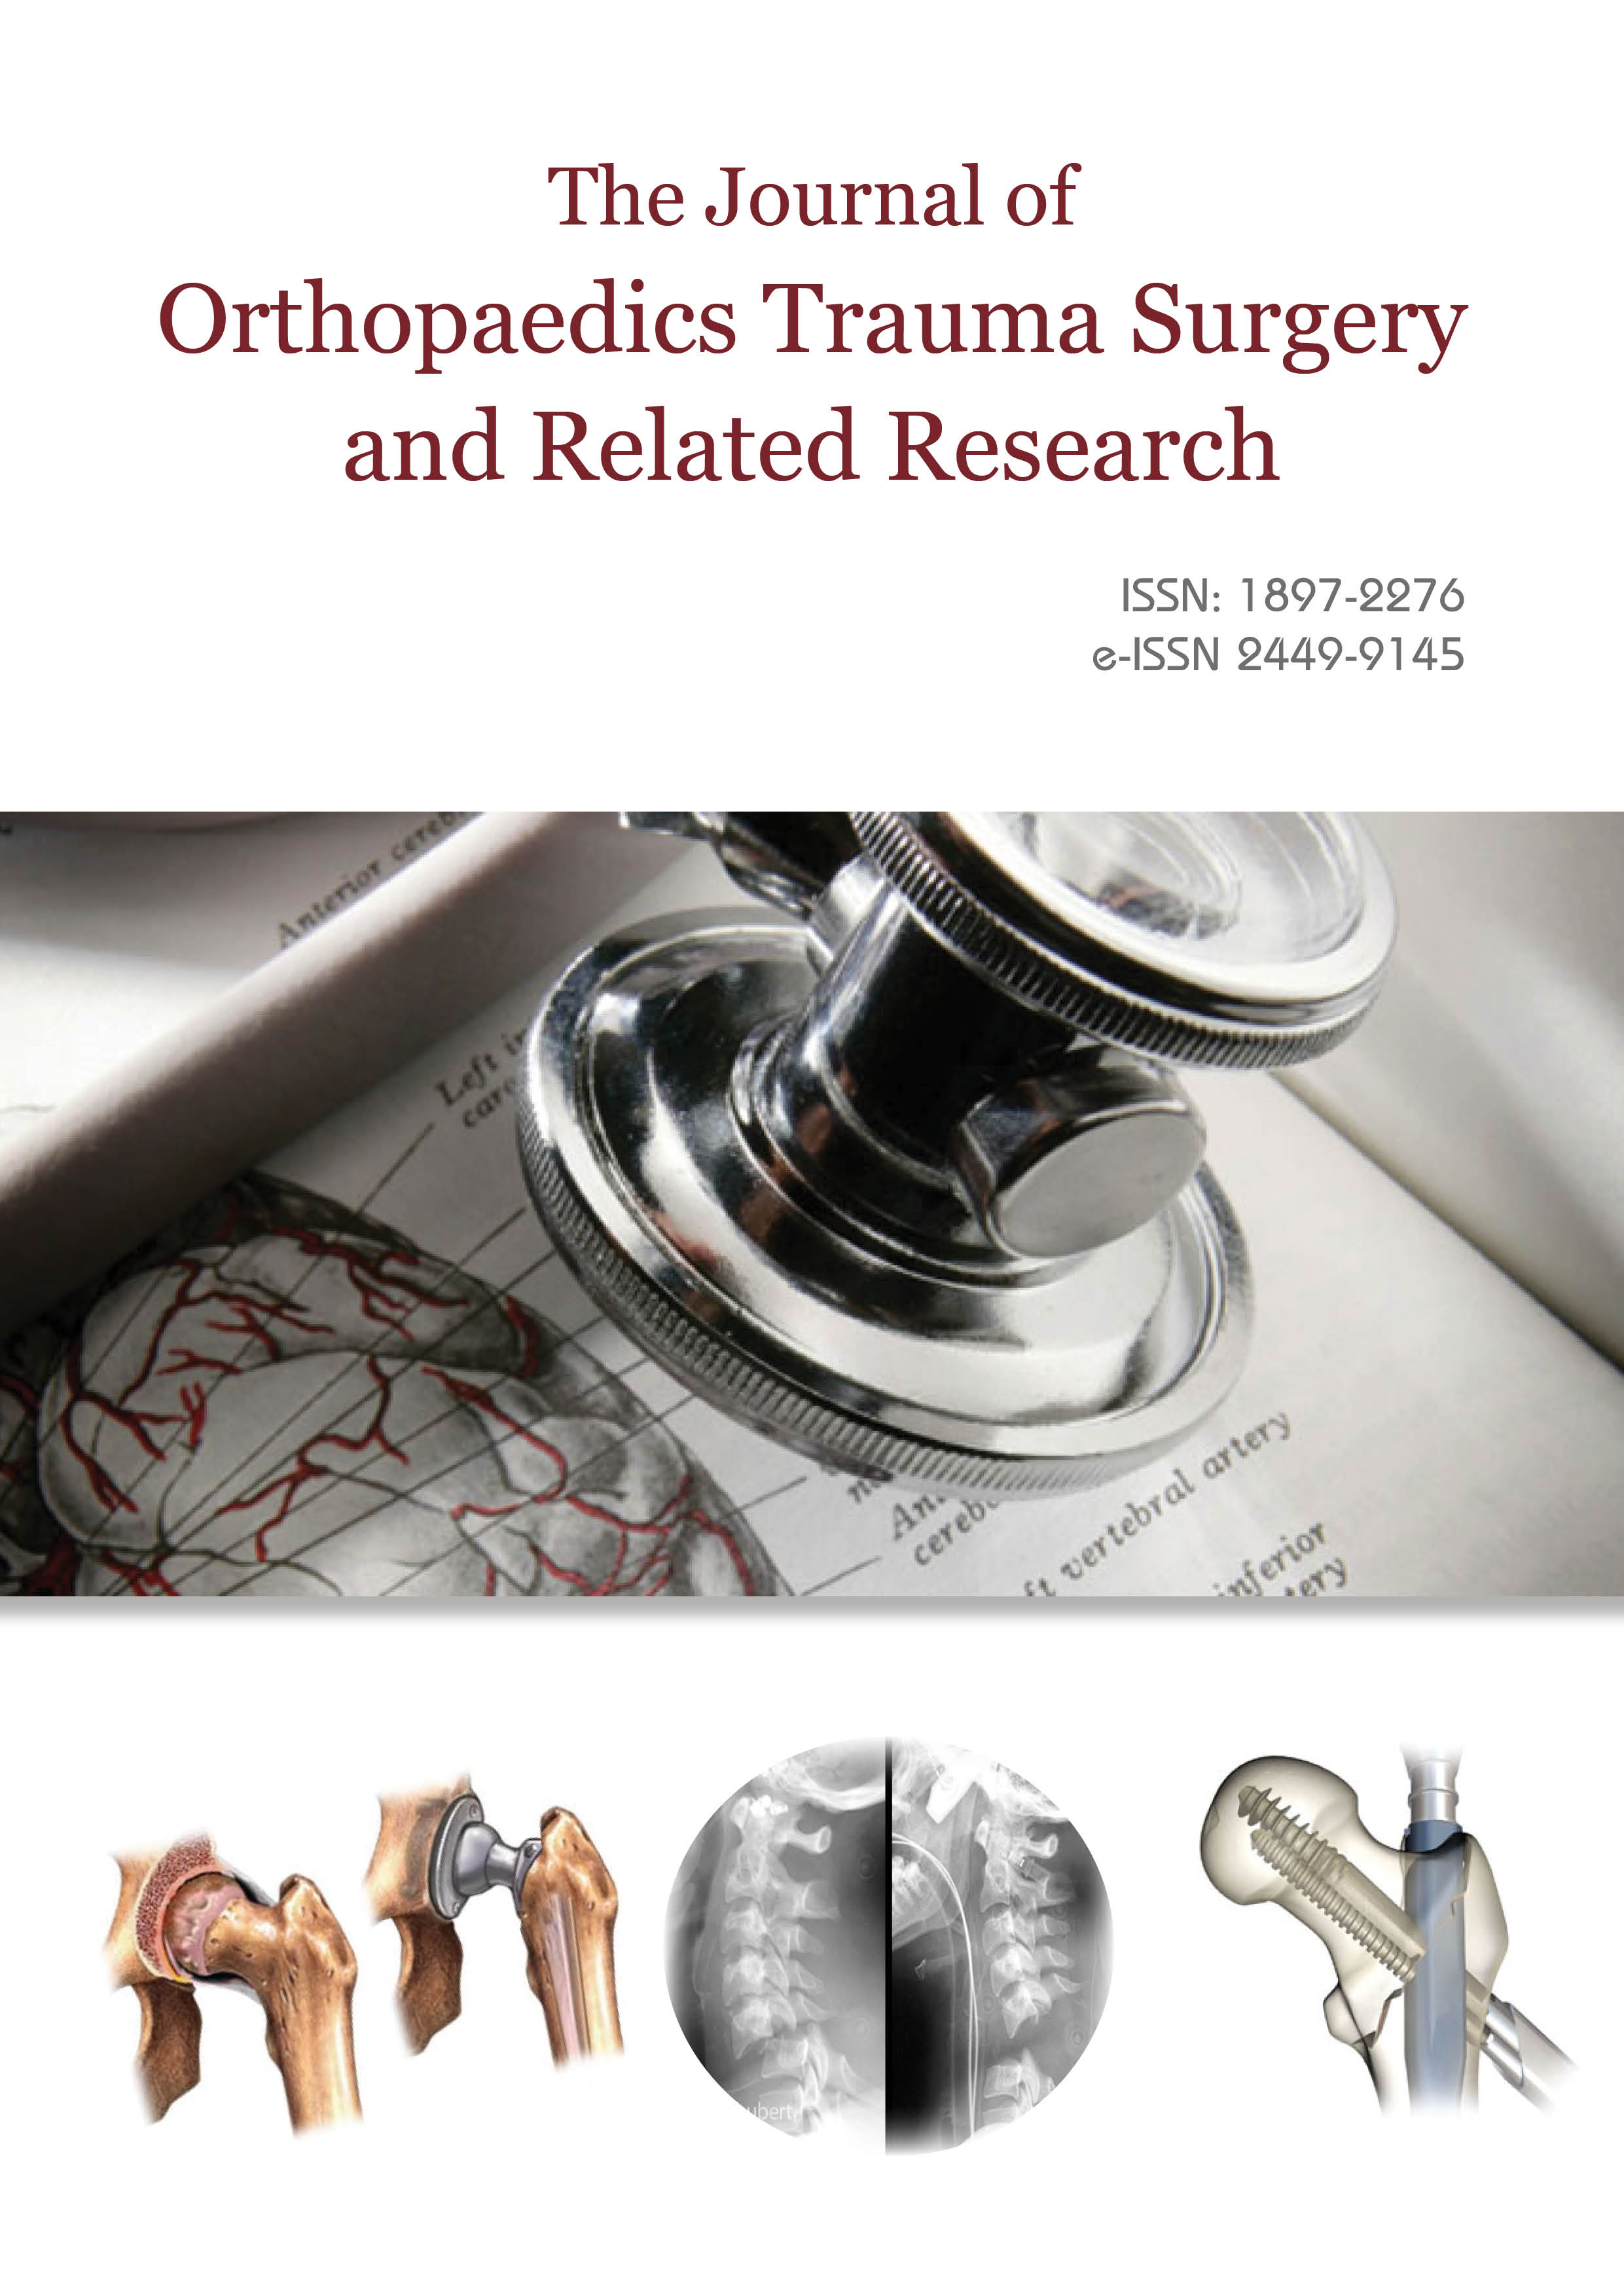 Annals of Medical and Health Sciences Research